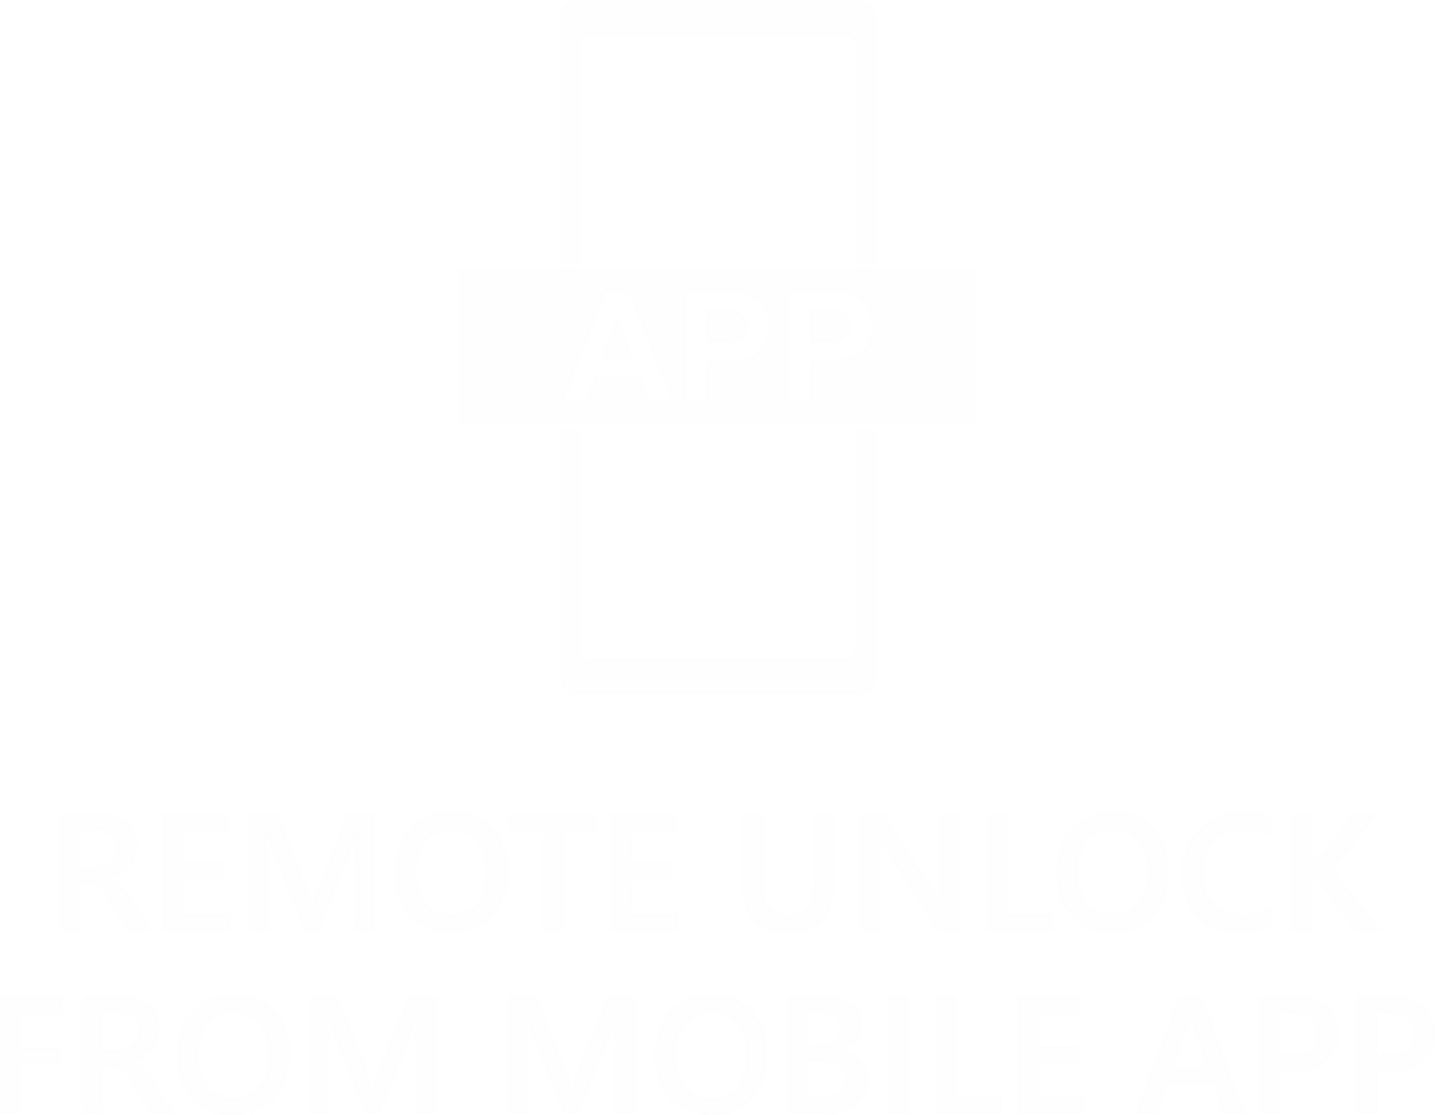 App Icon. Remote unlock from Mobile App.